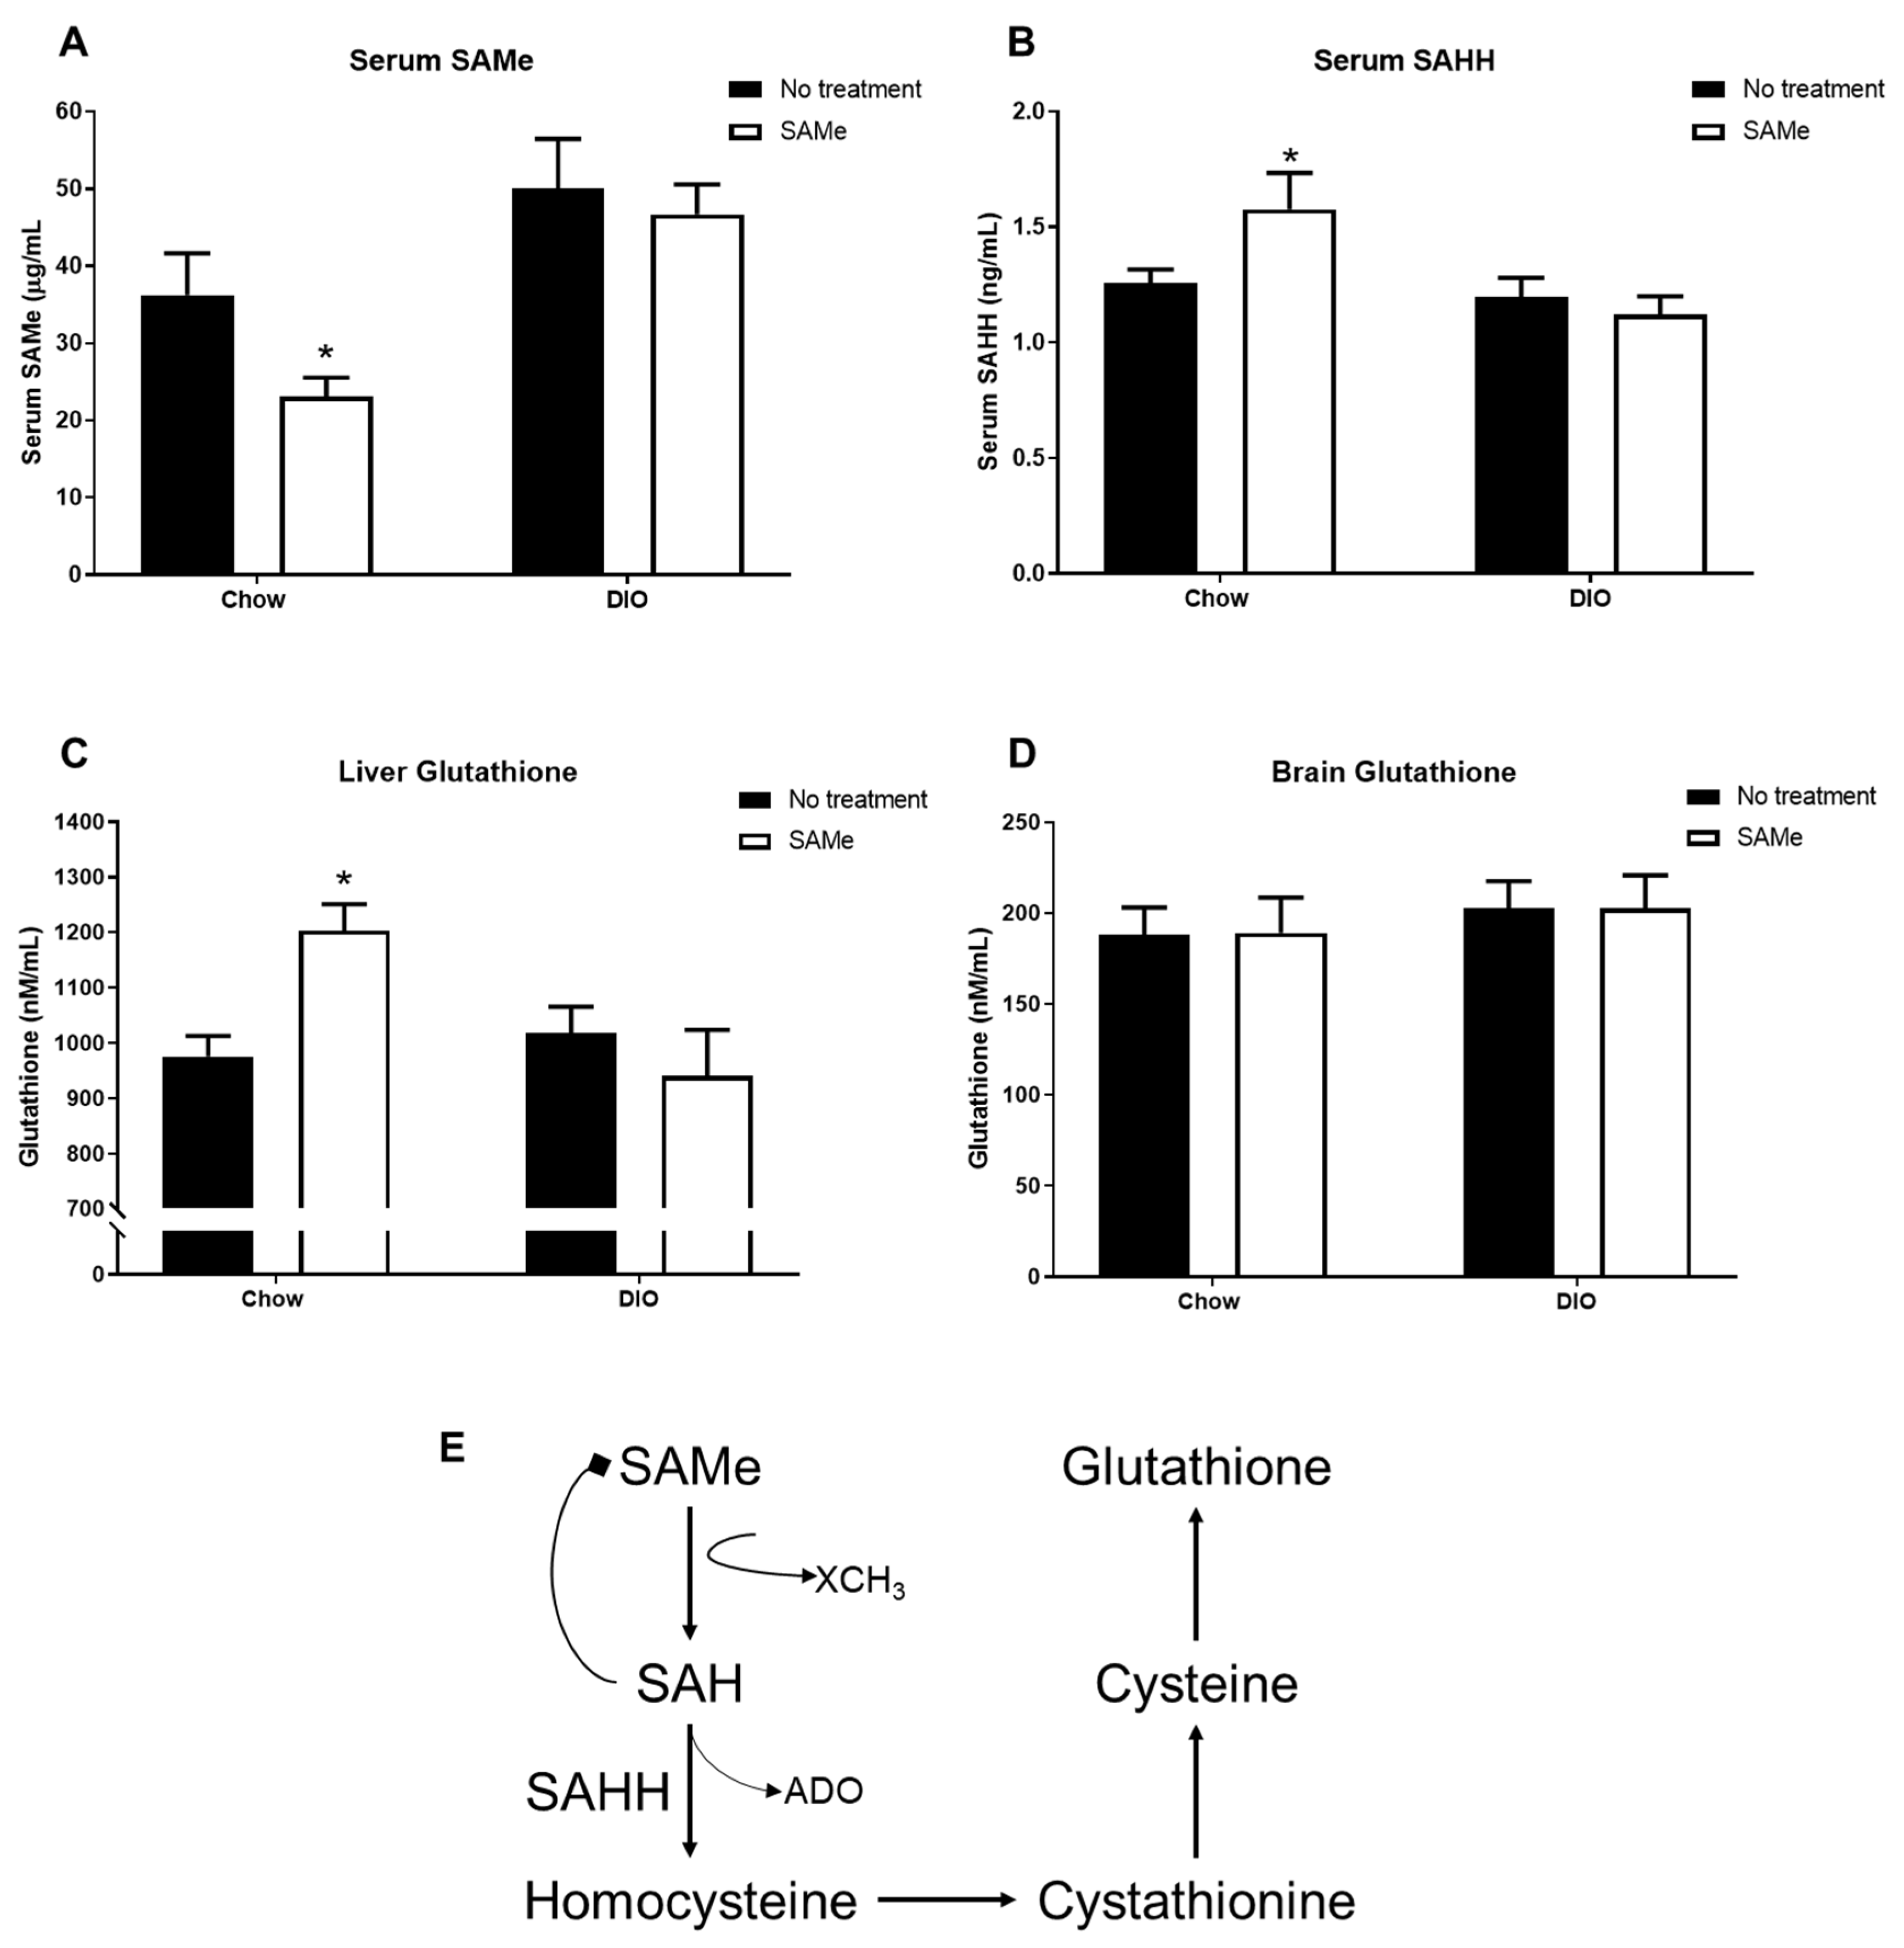 Nutrients | Free Full-Text | Obesity Prevents S-Adenosylmethionine-Mediated  Improvements in Age-Related Peripheral and Hippocampal Outcomes | HTML